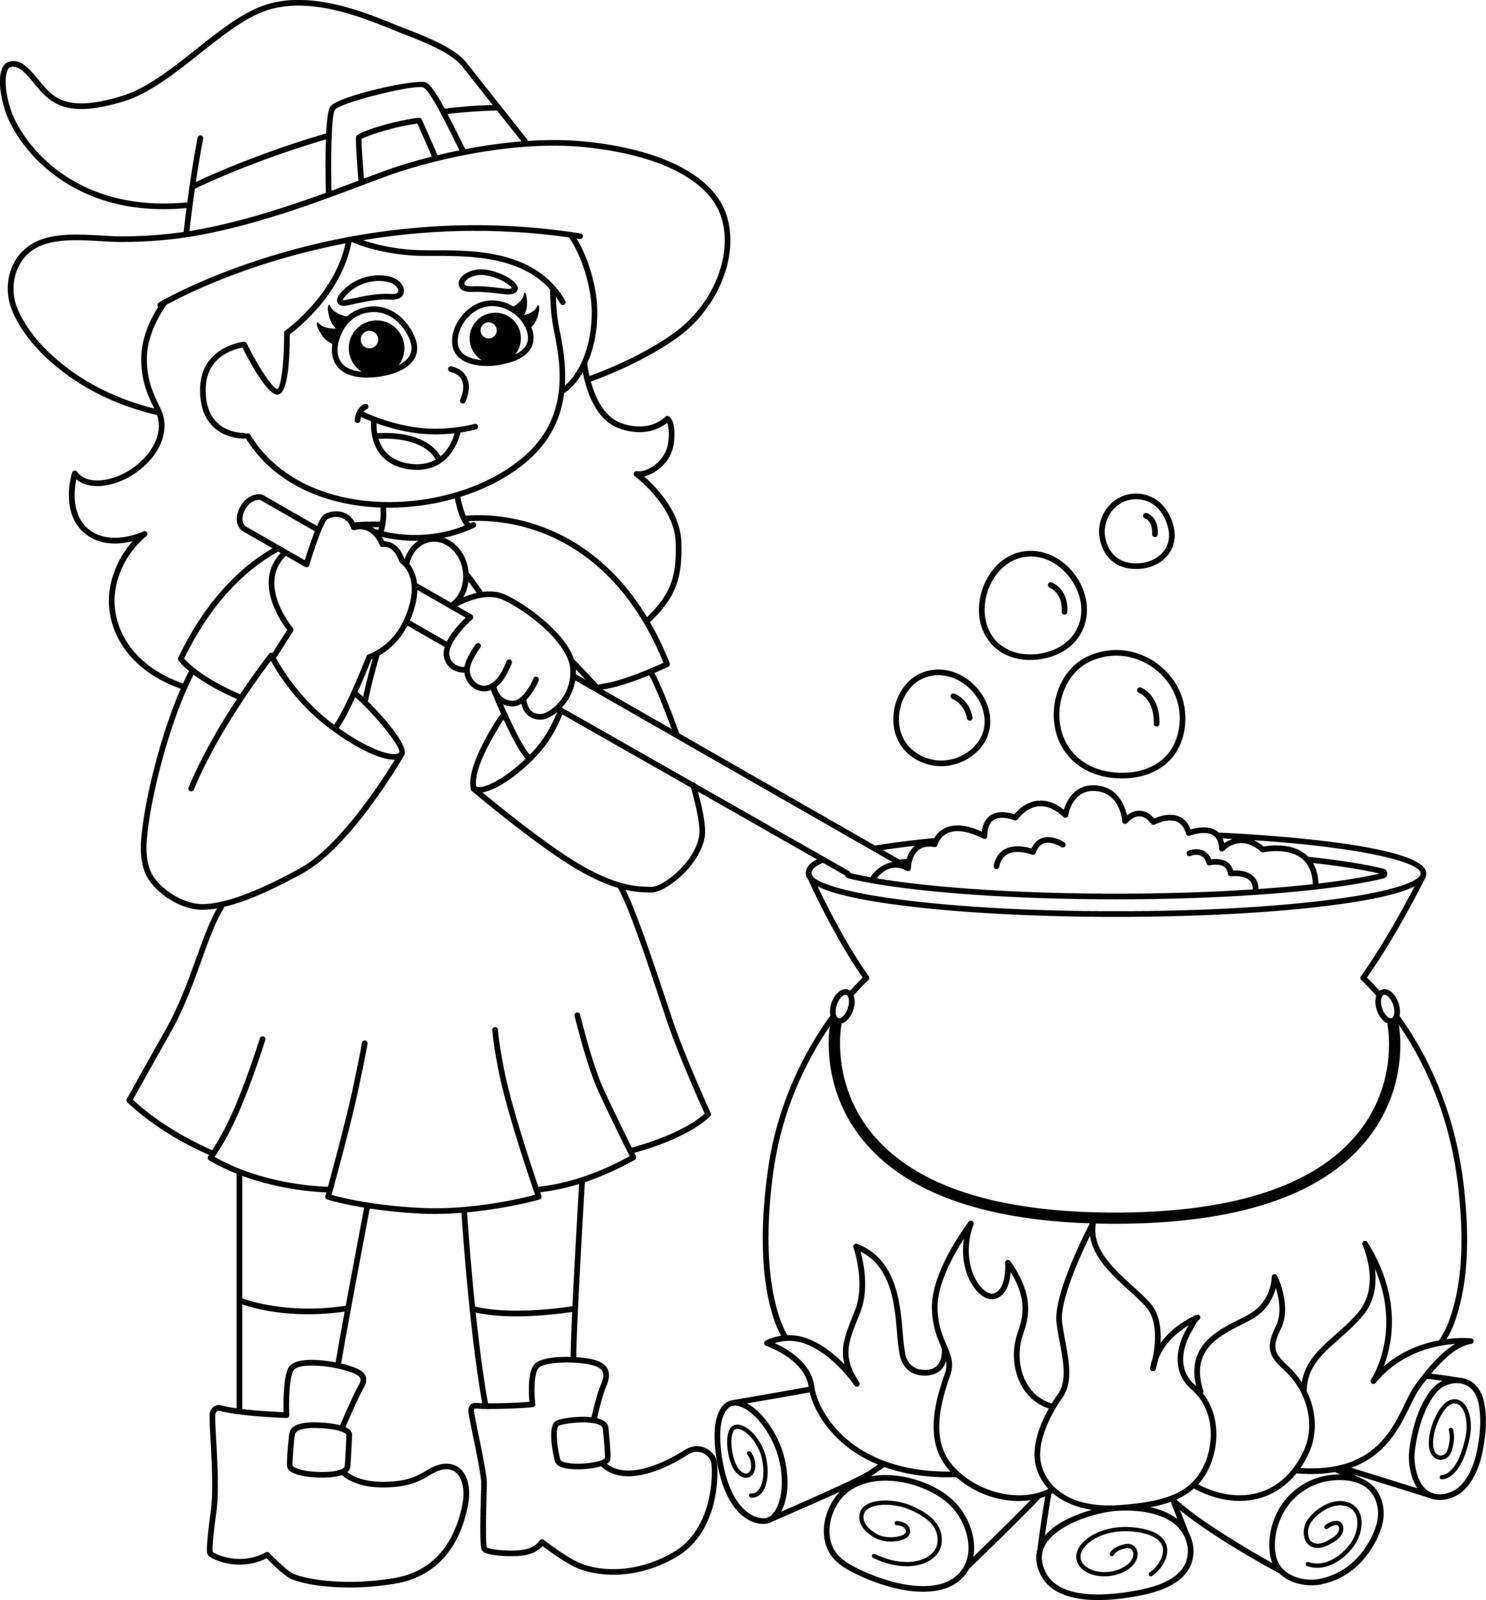 A cute and funny coloring page of a witch and potion pot. Provides hours of coloring fun for children. To color, this page is very easy. Suitable for little kids and toddlers.